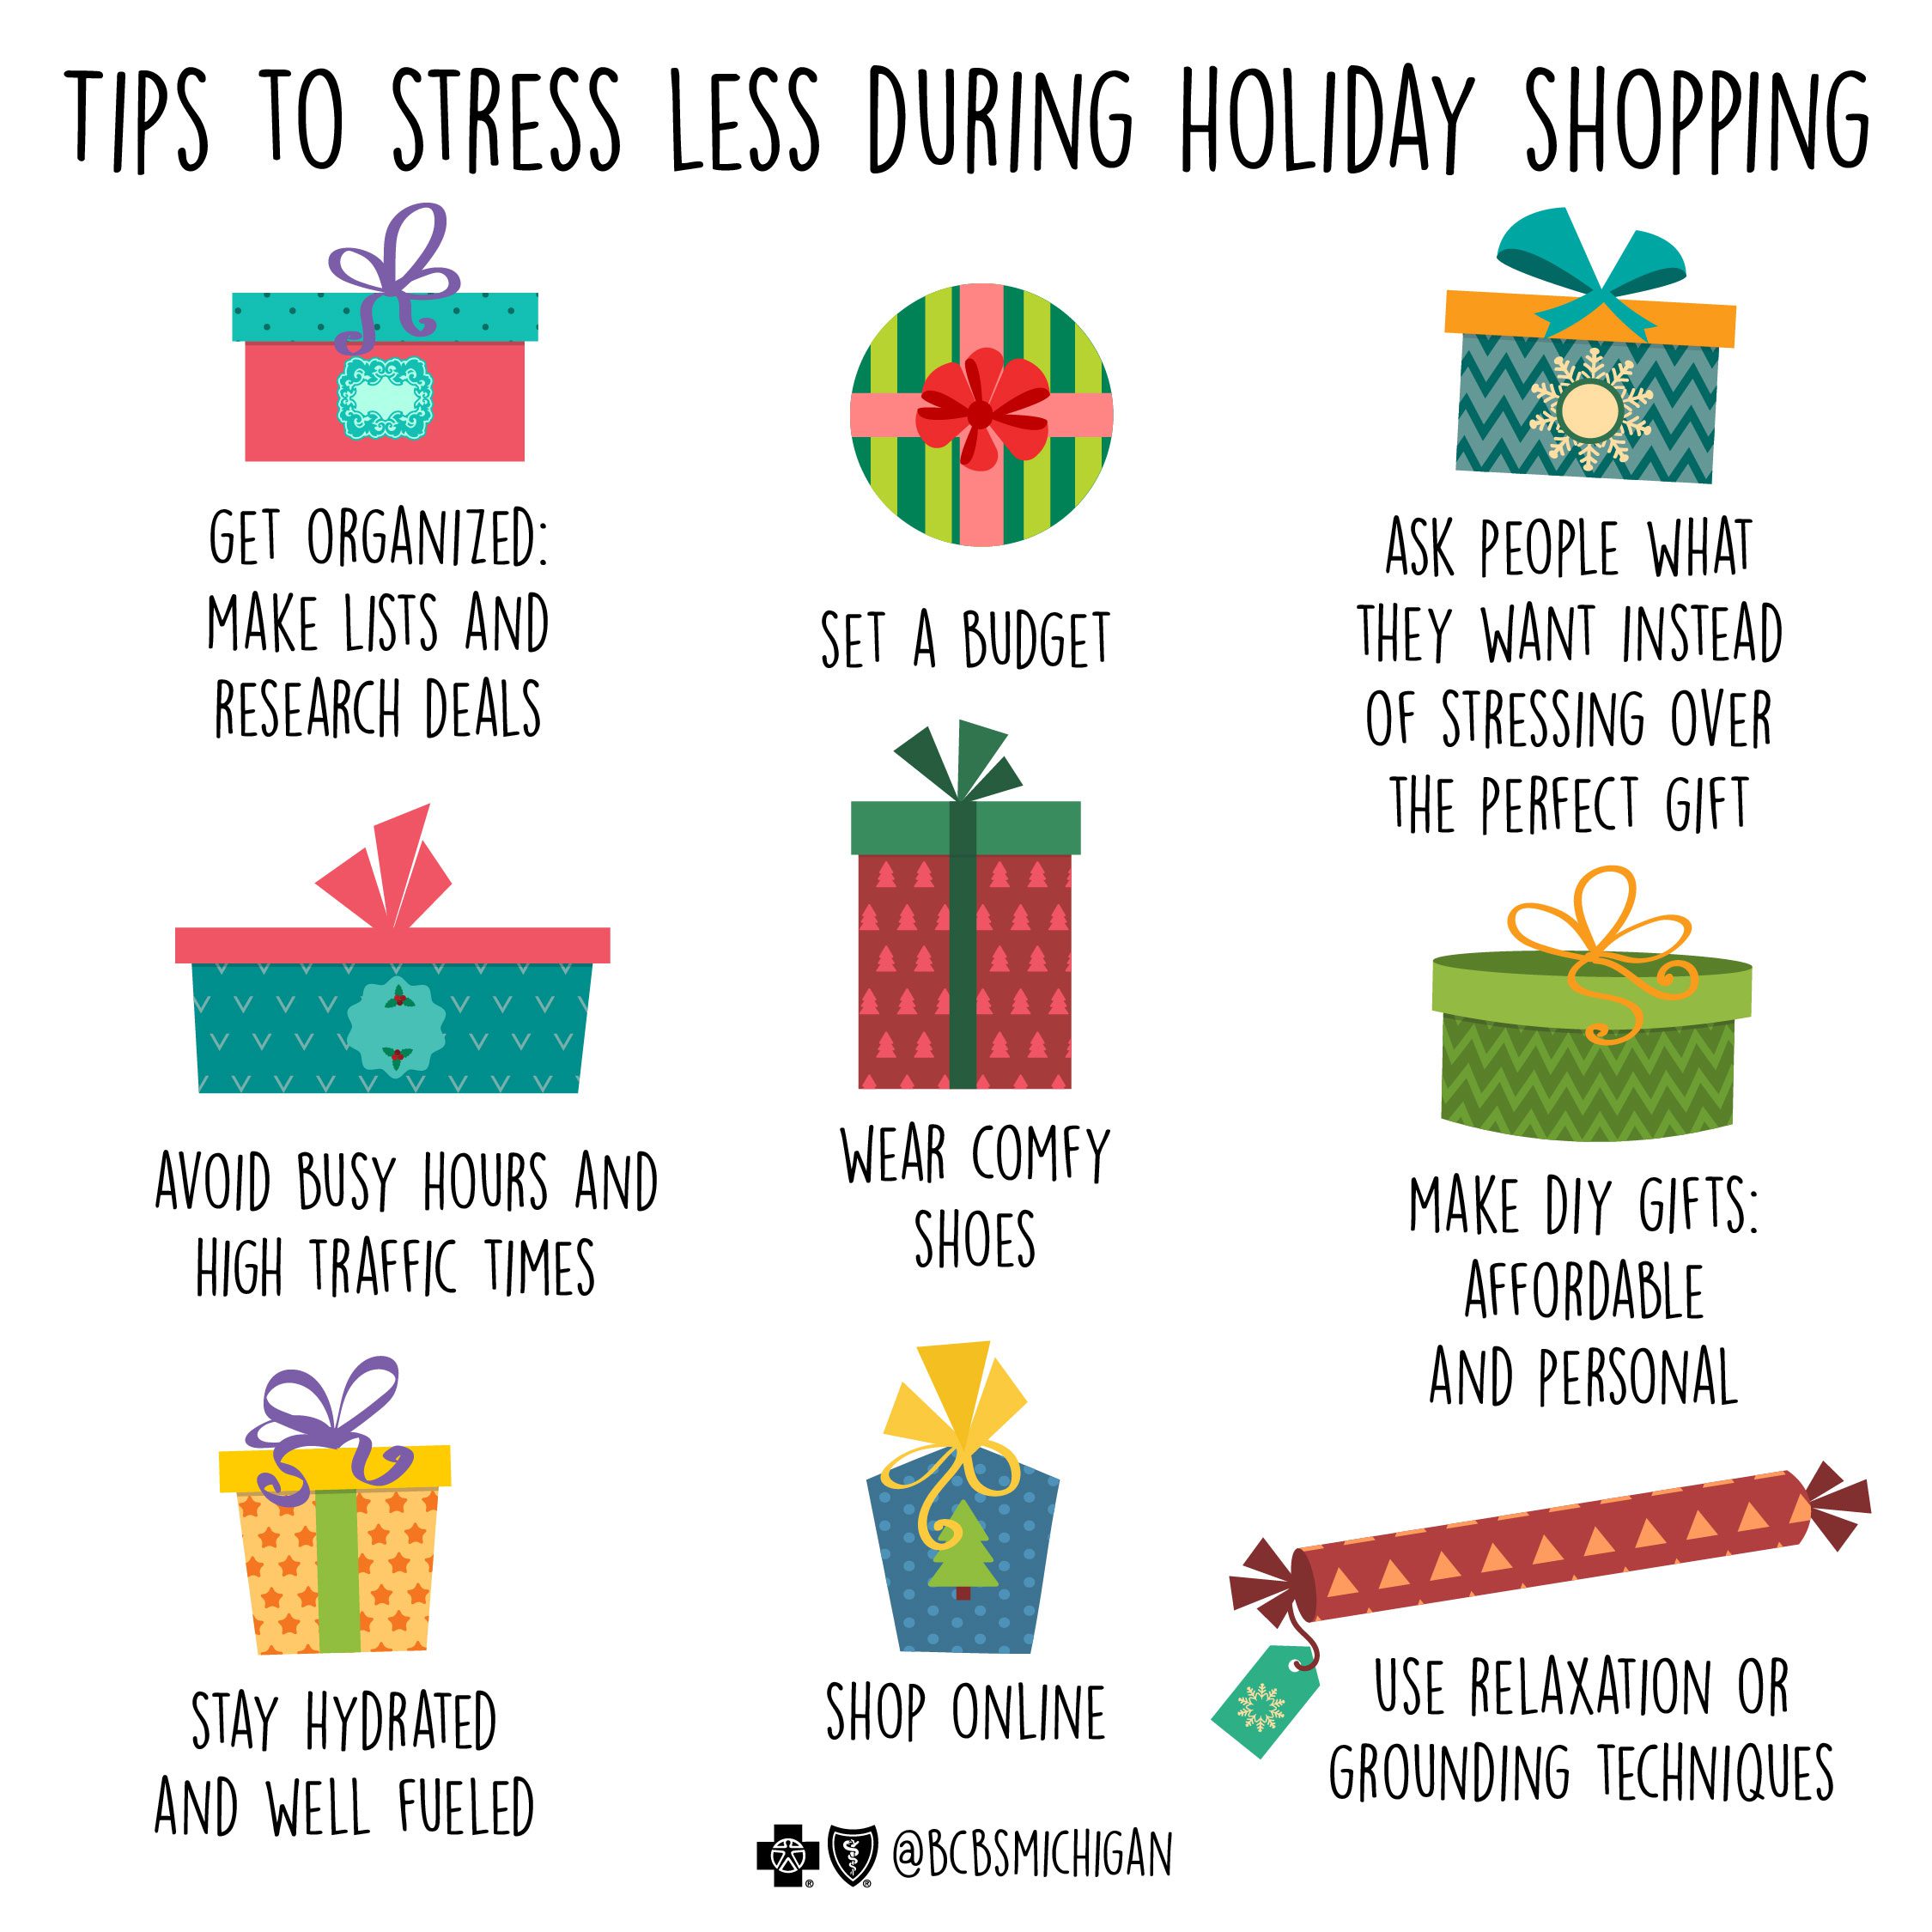 Tips to Stress Less During the Holiday  